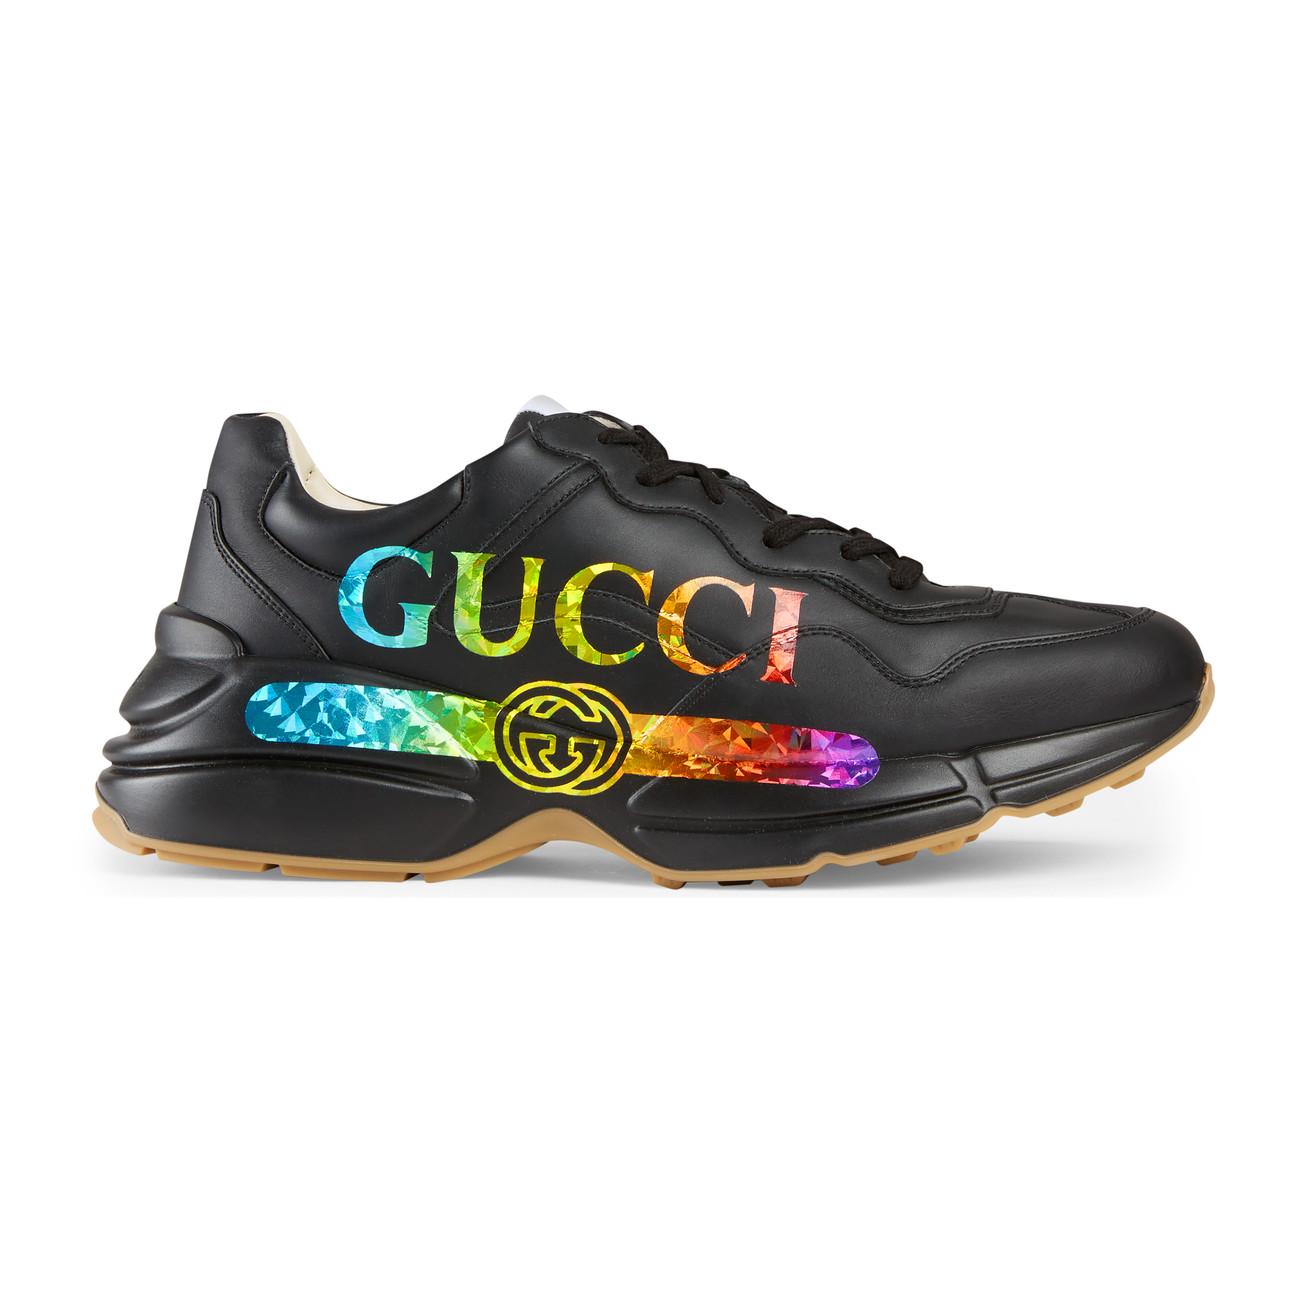 Gucci Rhyton Leather Sneaker With Logo in Black for Men - Lyst